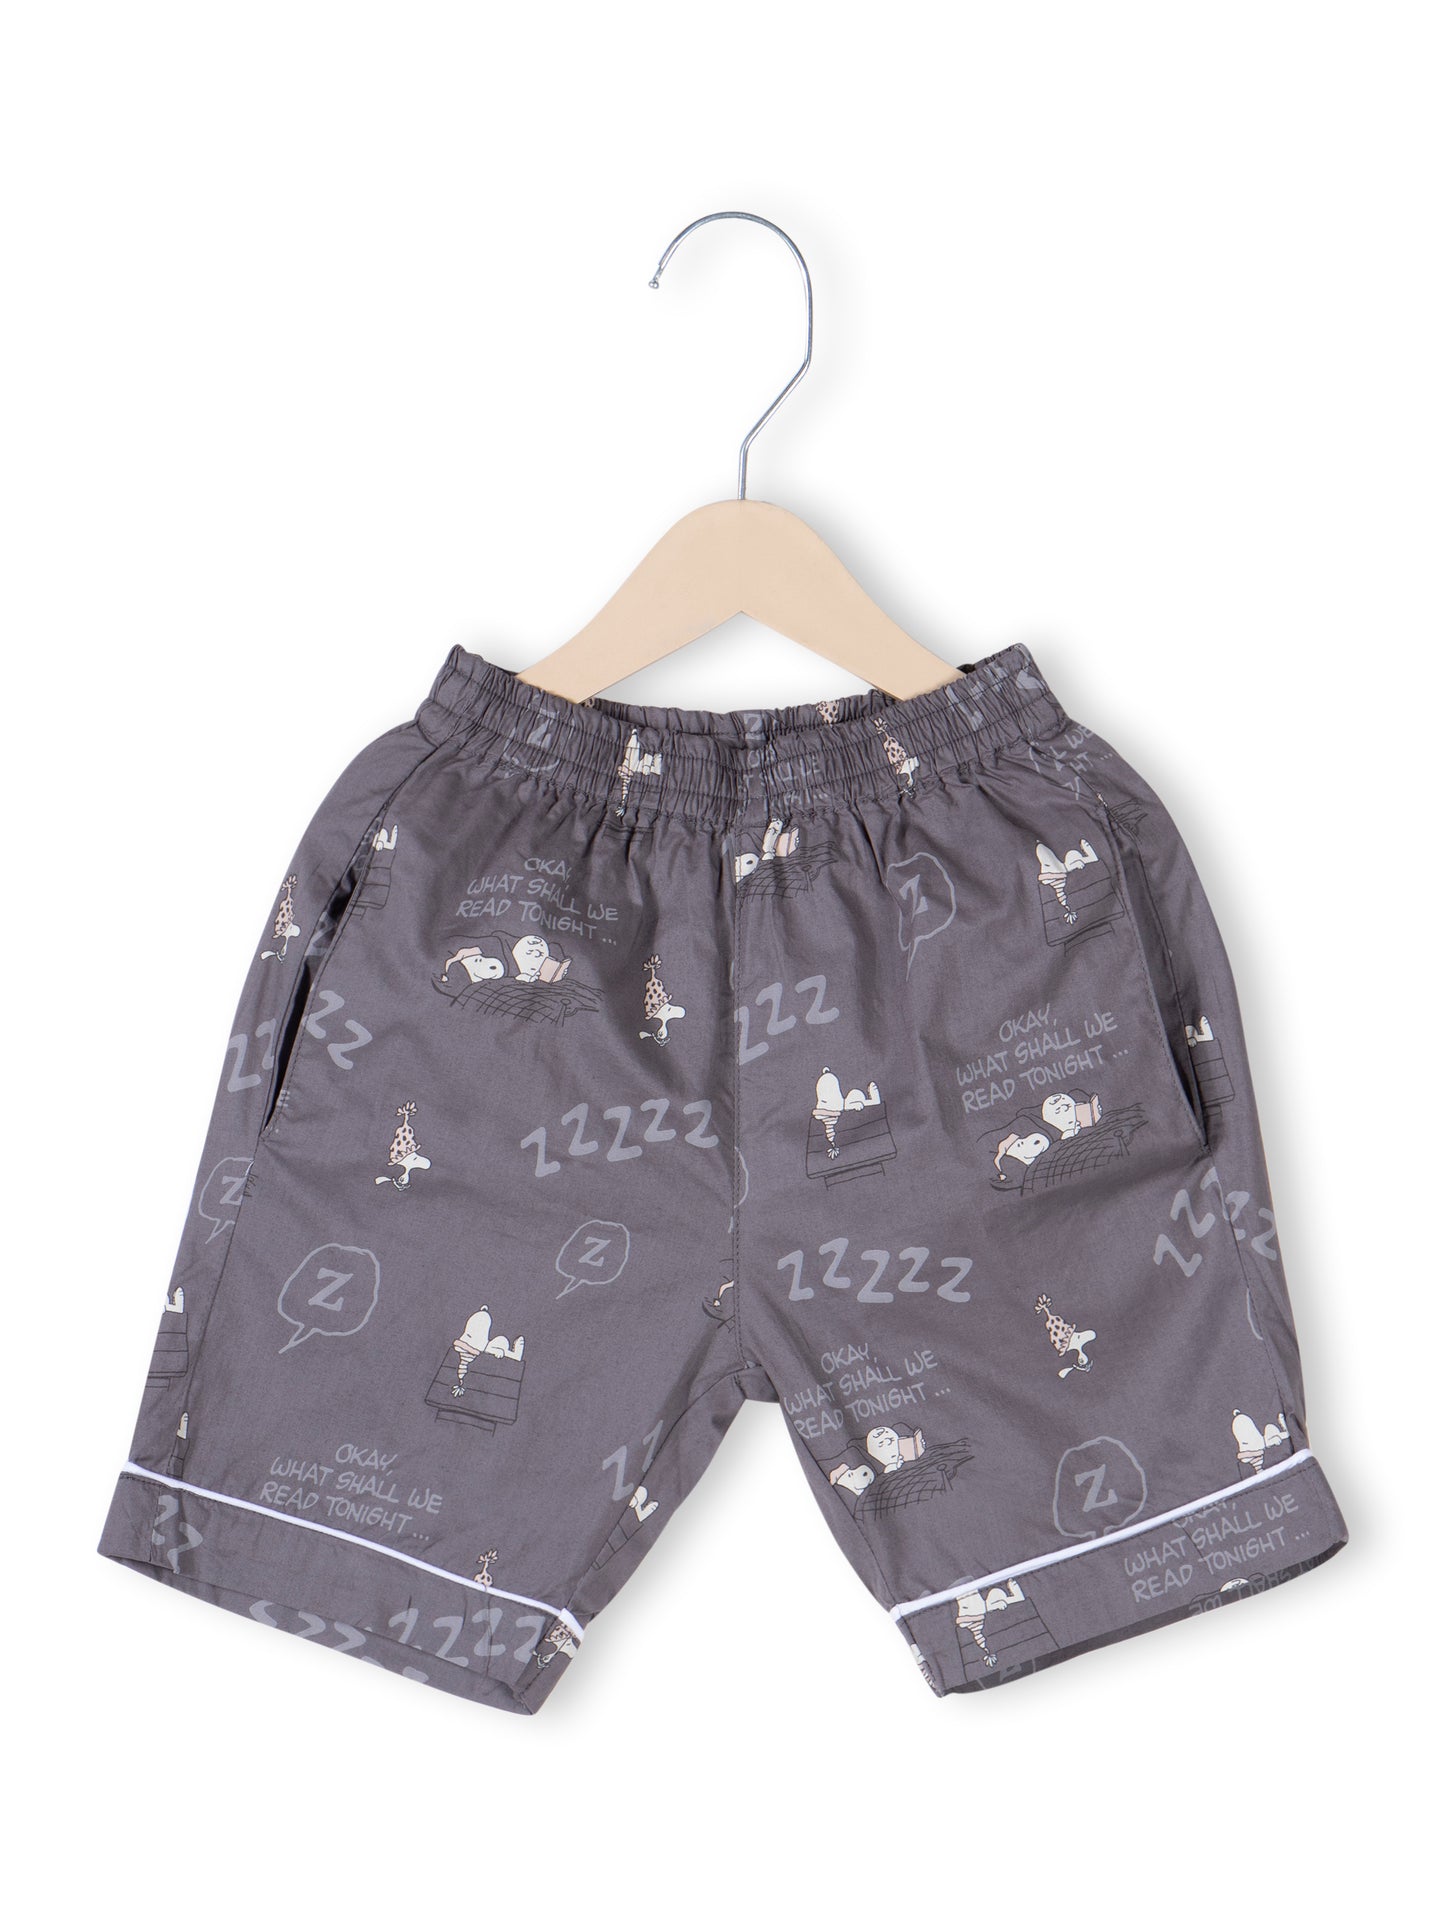 Notched Night suit for Girls & Boys- Grey